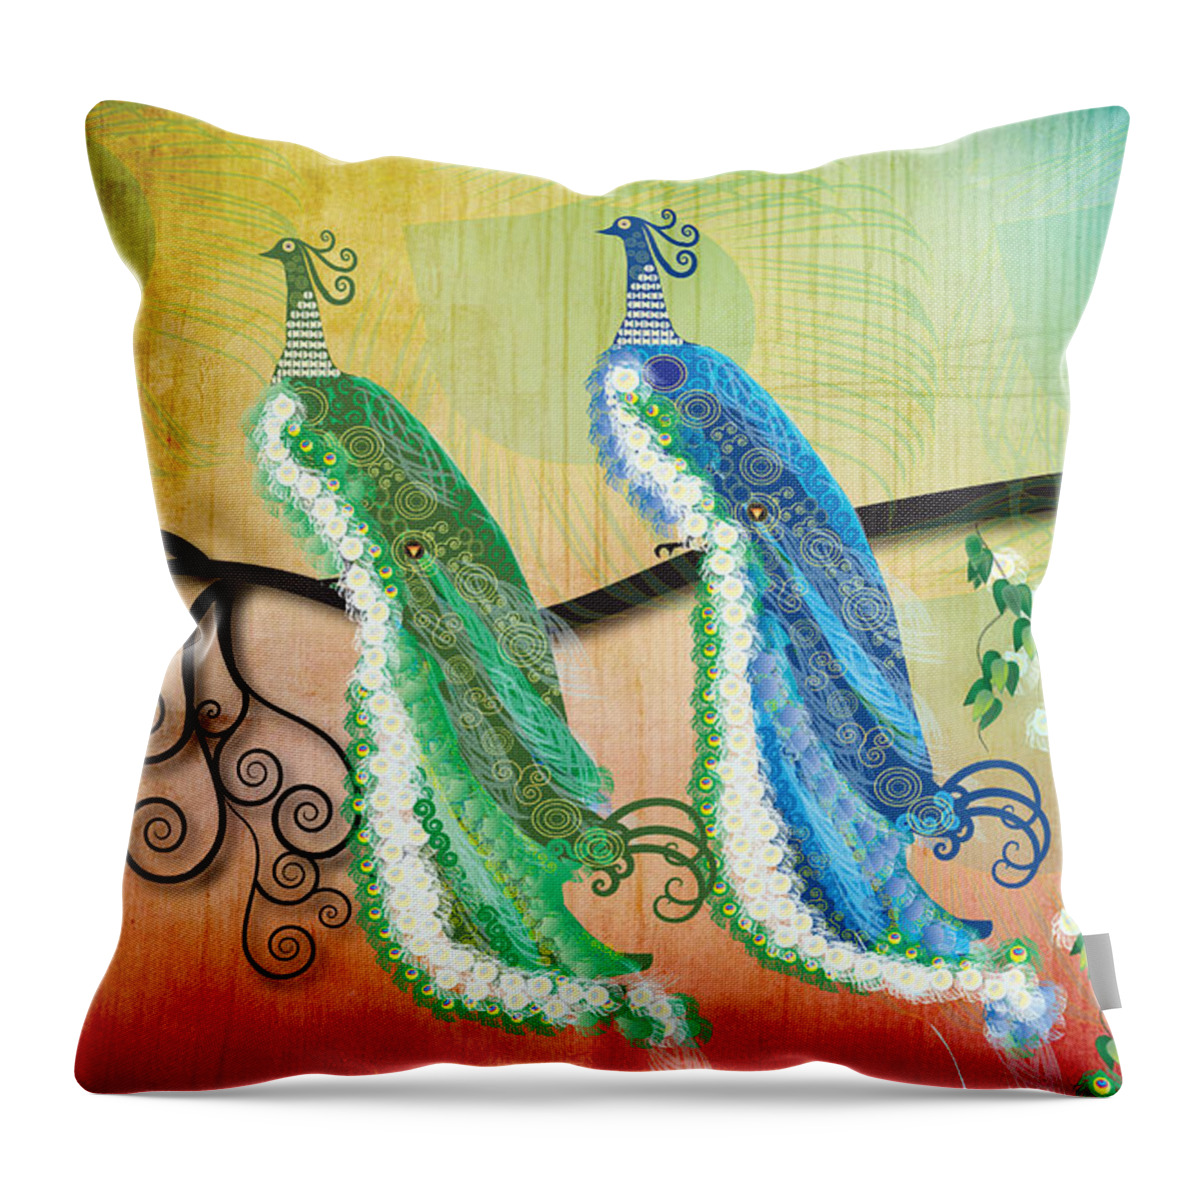 Swirls Throw Pillow featuring the digital art Peacock Love by Kim Prowse